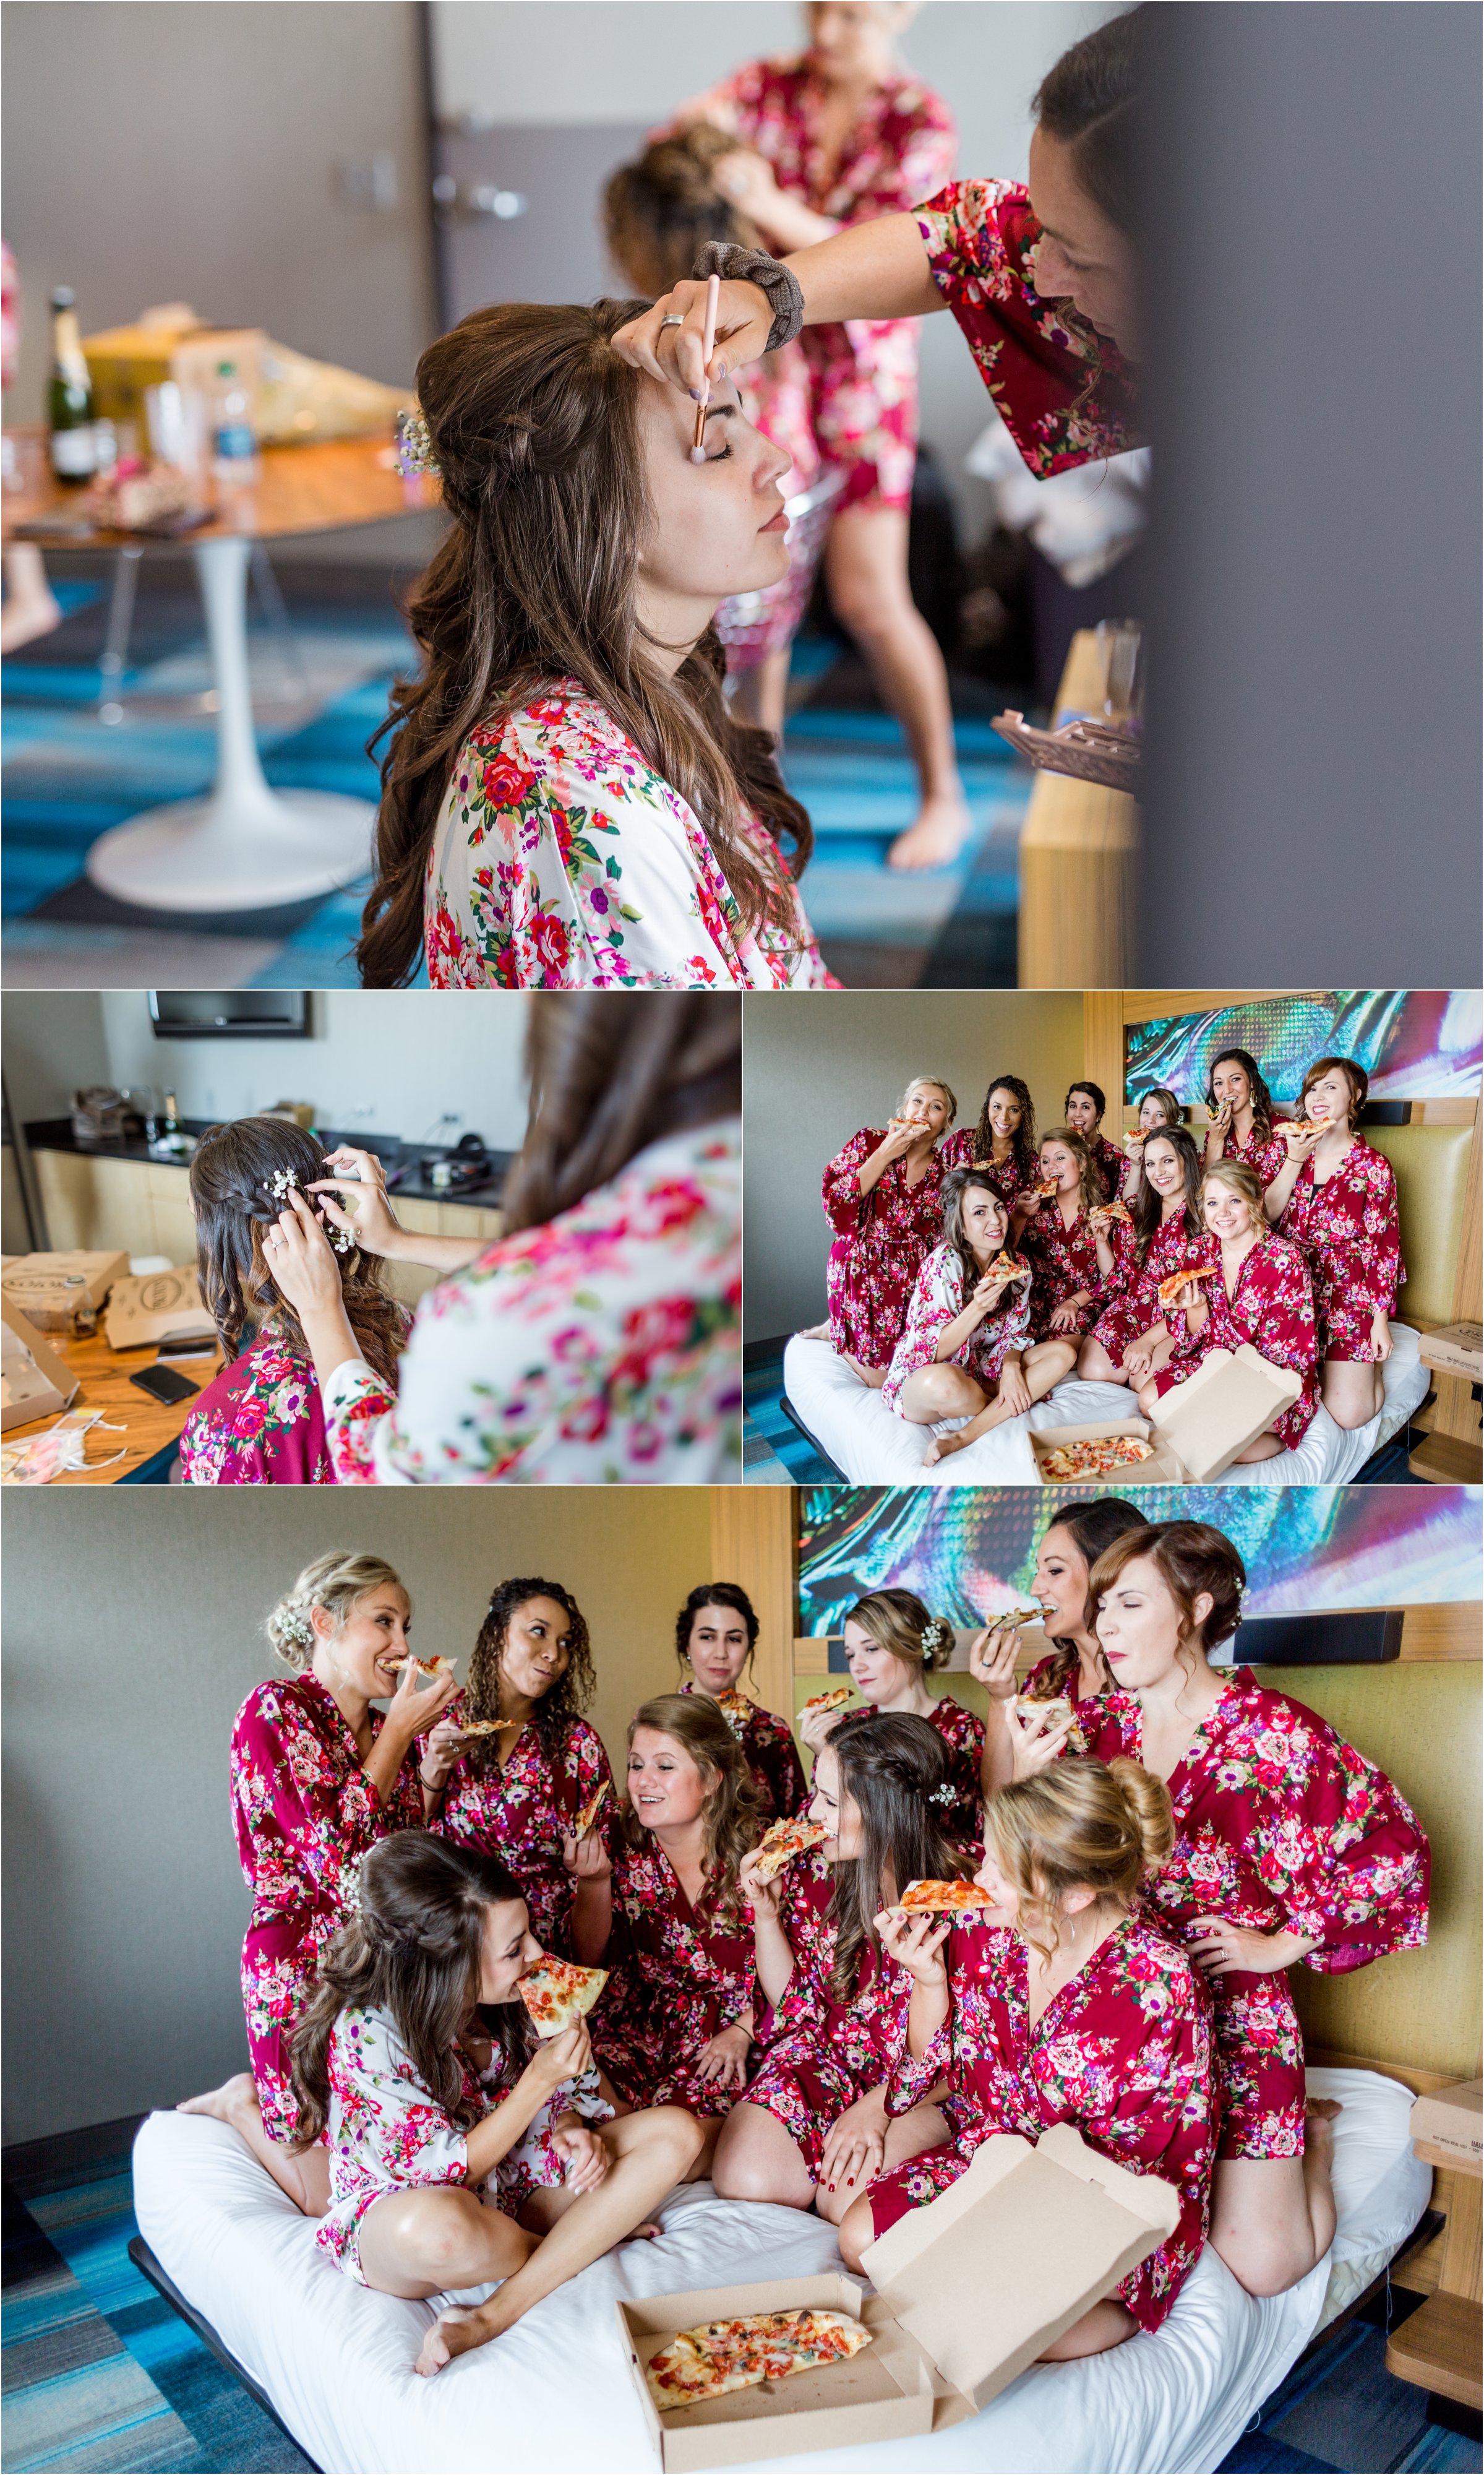 bride gets her makeup and hair done then bridesmaids and bride eat pizza on bed together